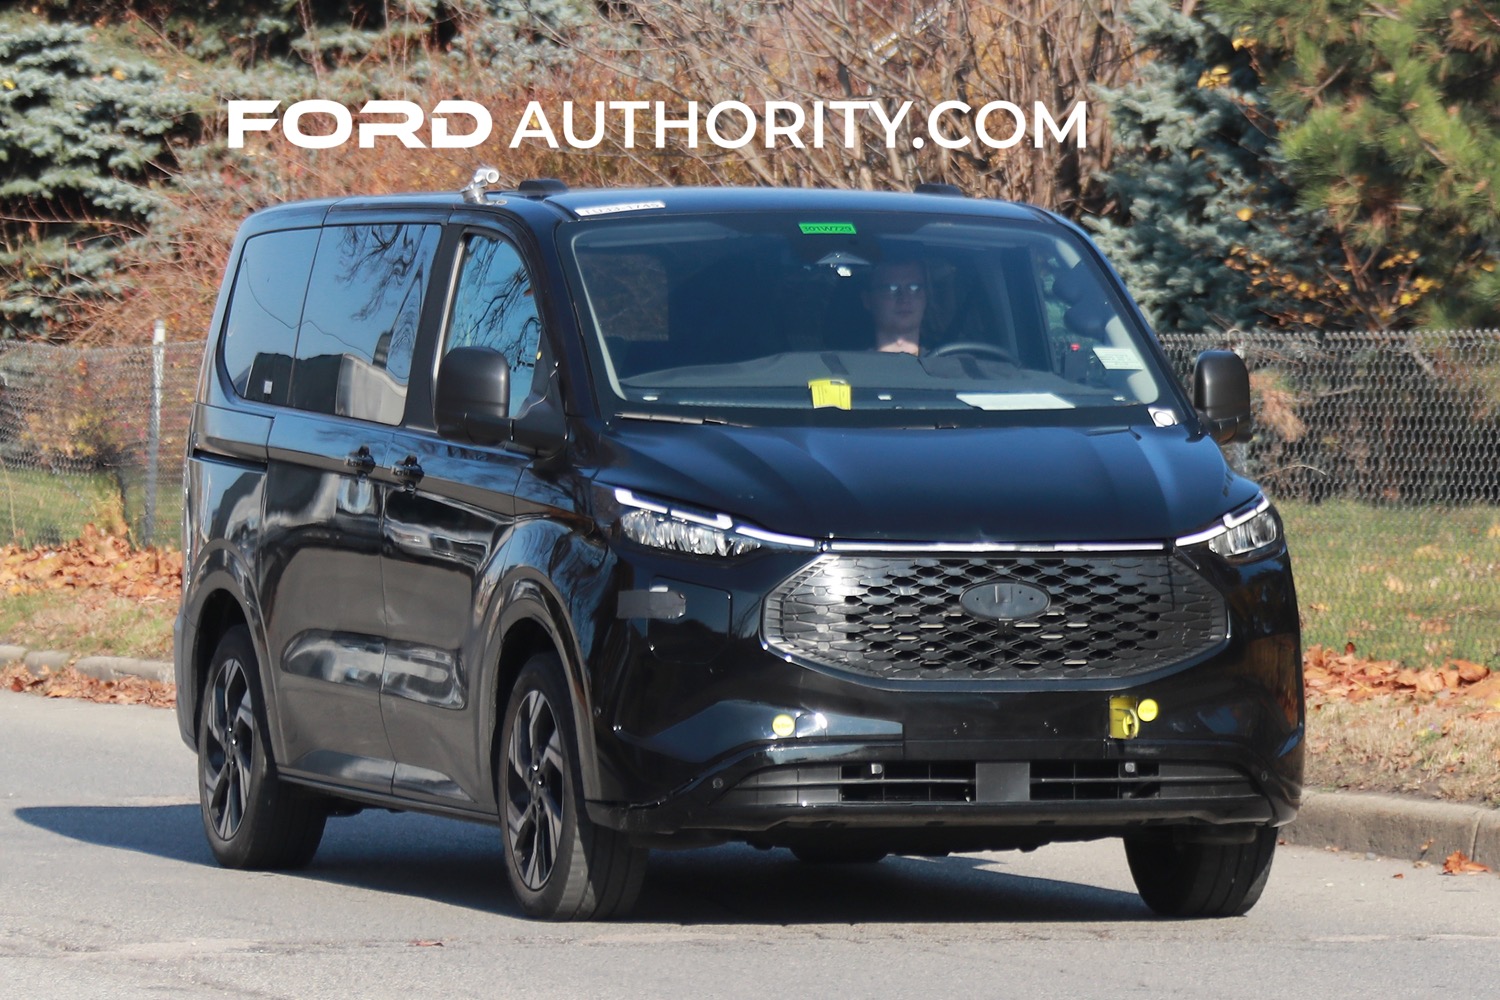 Ford Transit Custom Once Again Spotted Testing In U.S.